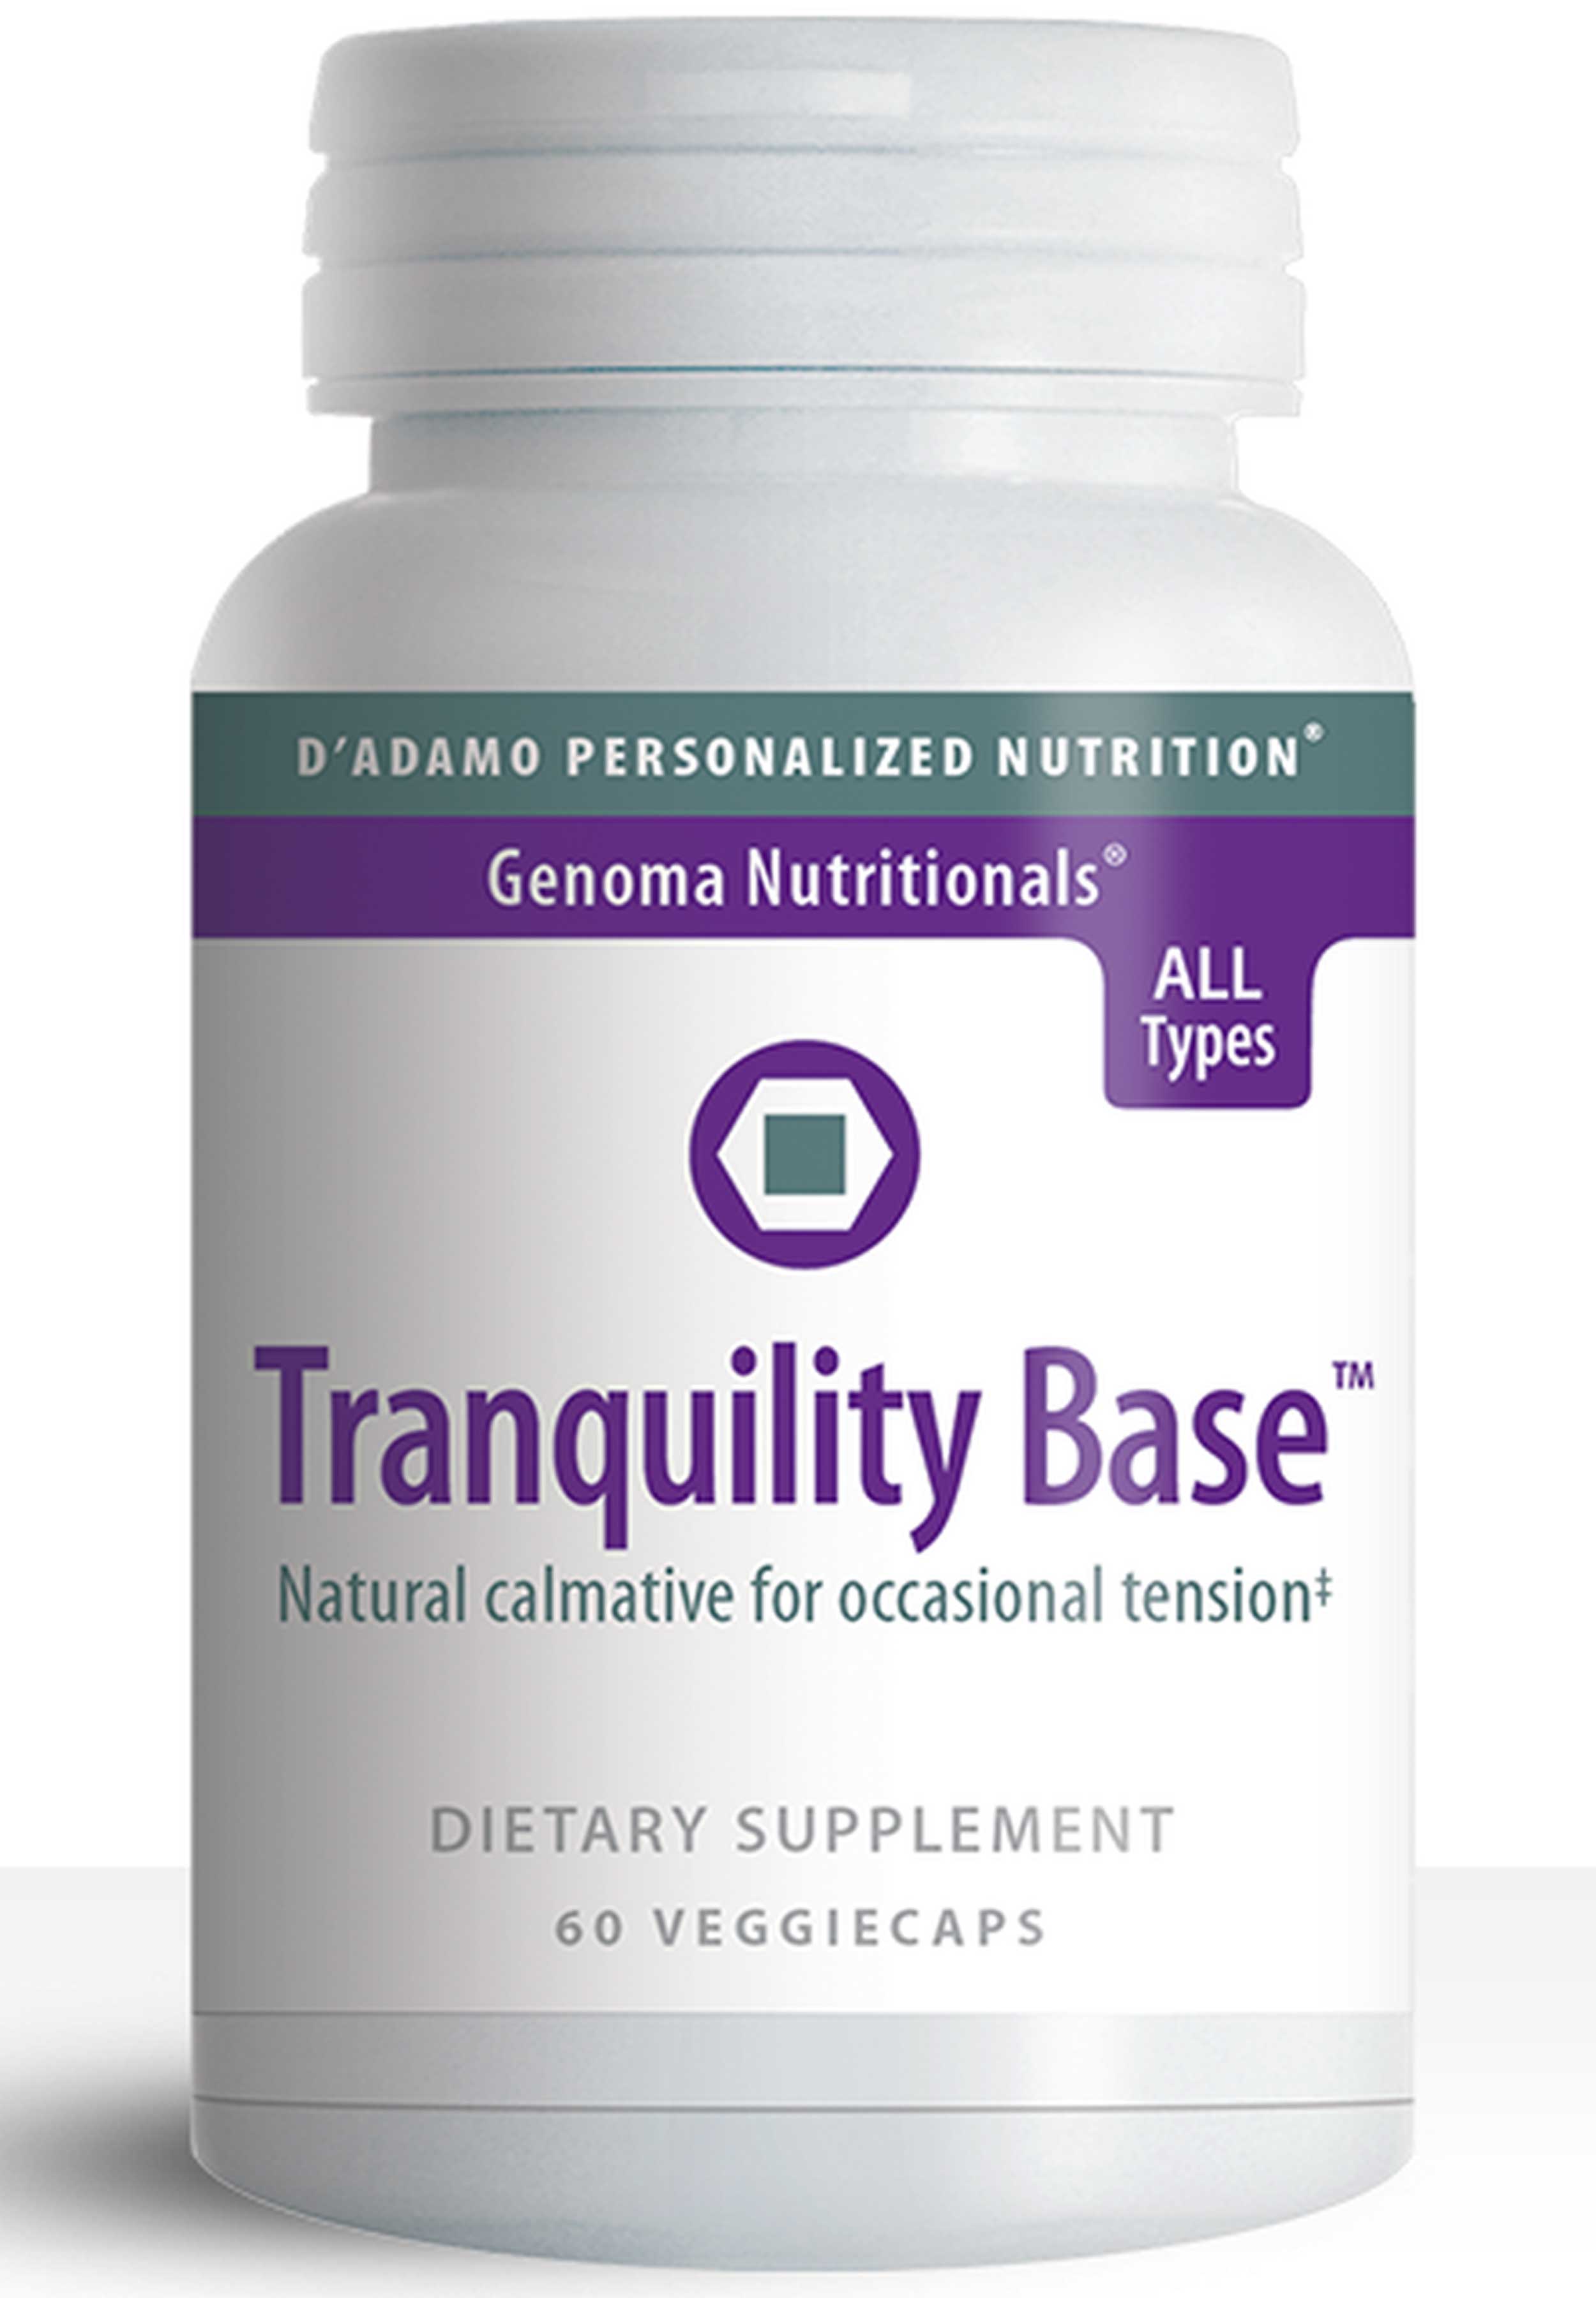 D'Adamo Personalized Nutrition Tranquility Base